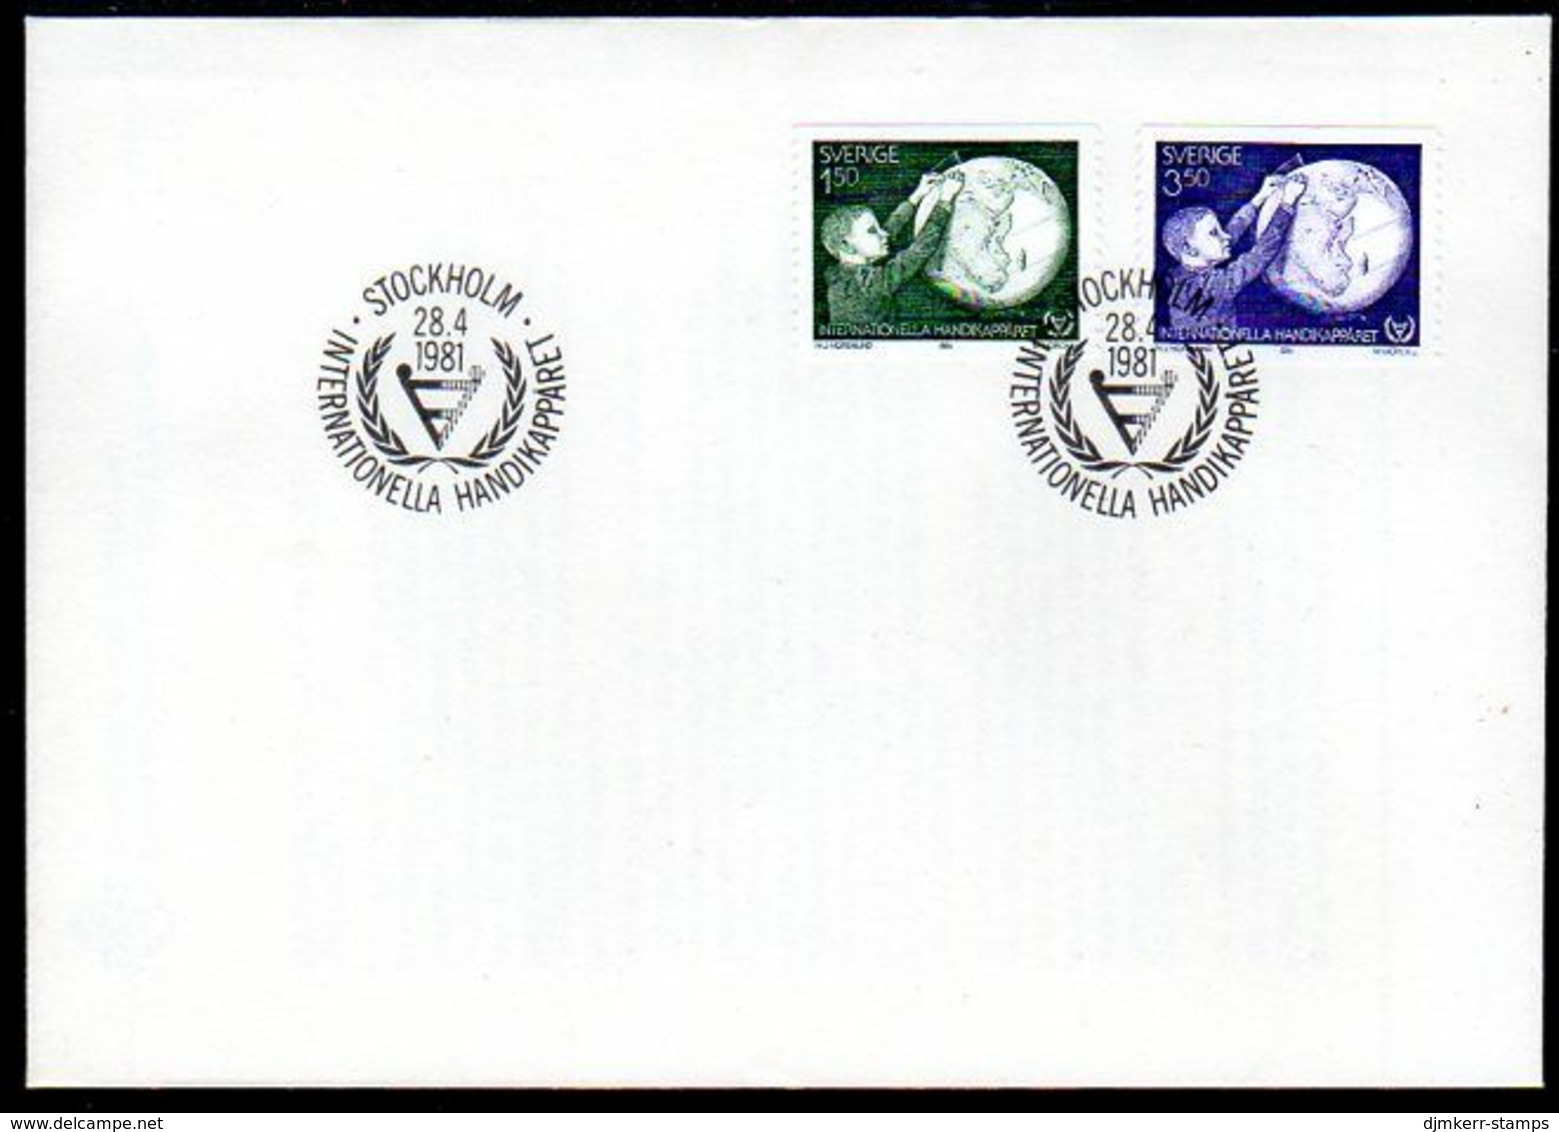 SWEDEN 1981 Year Of The Disabled FDC. Michel 1143-44 - FDC